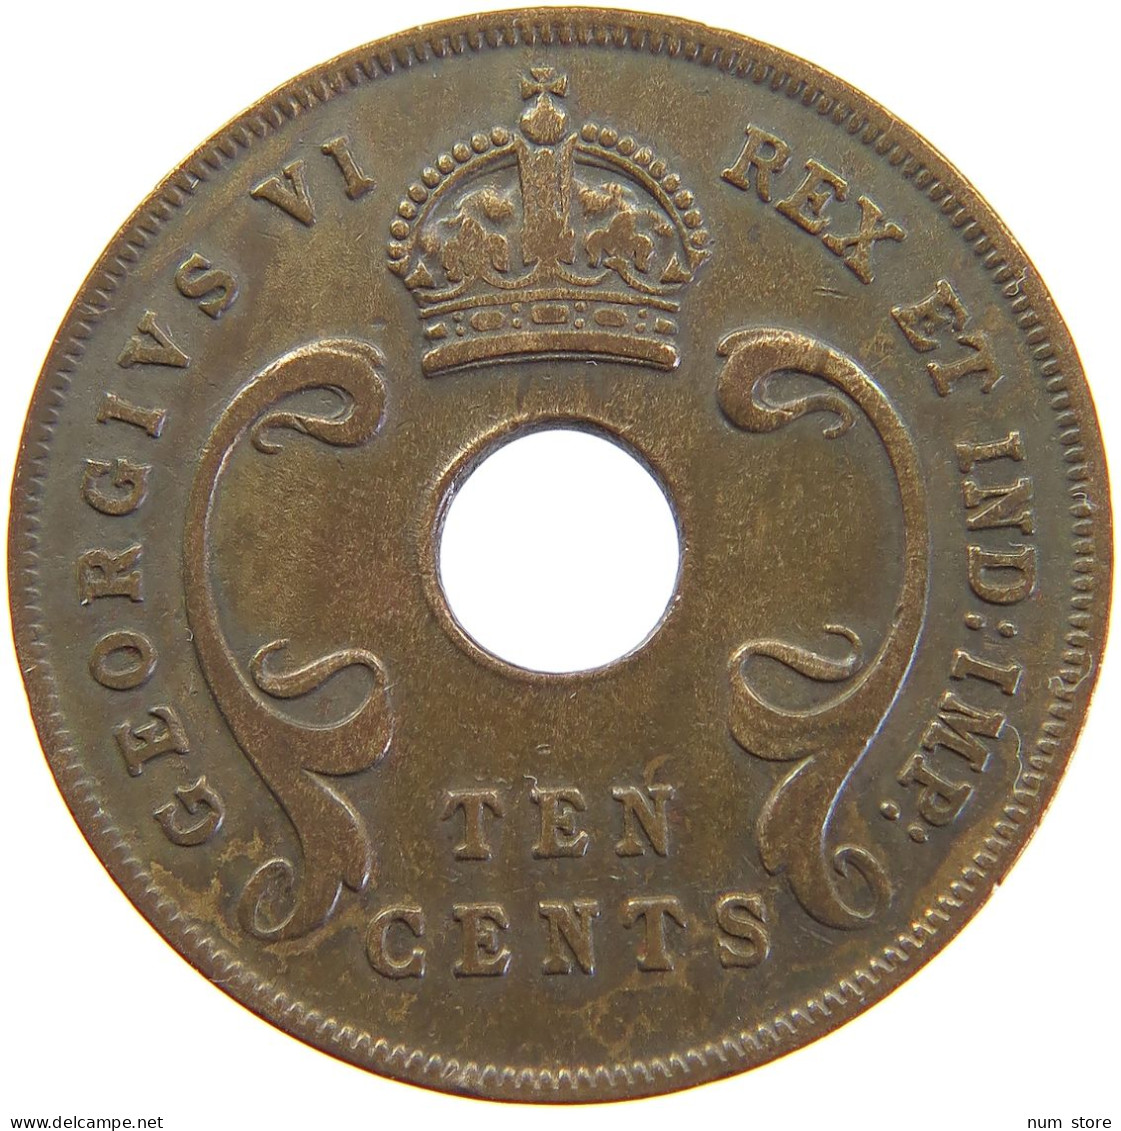 EAST AFRICA 10 CENTS 1941 GEORGE V. (1910-1936) #MA 067723 - Colonia Británica